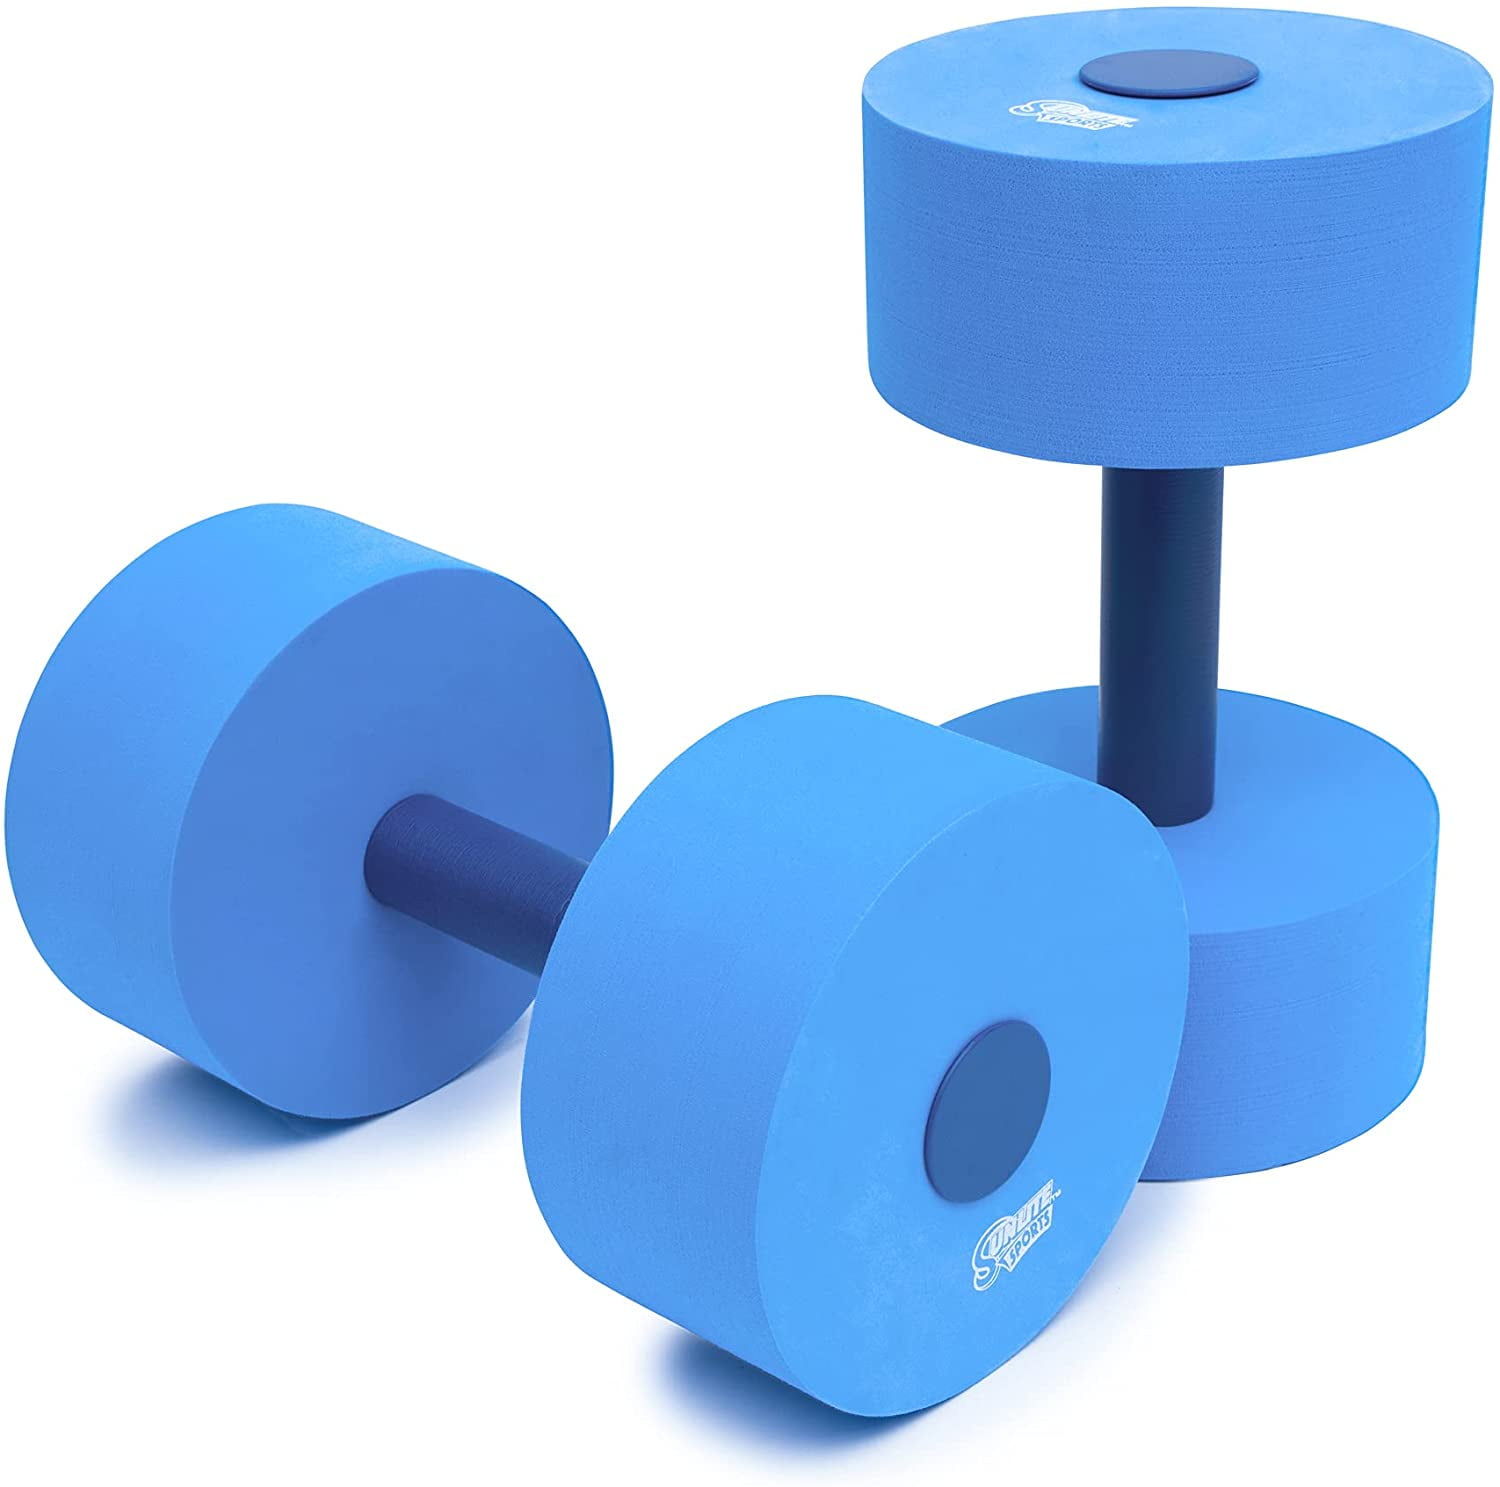 Poer Water Dumbbell Aquatic Exercise Dumbells Water Aerobic Exercise Foam Dumbbell Pool Resistance EVA Water Barbells Hand Bar For Yoga Home Swimming Pools Sport Fitness 2pcs Blue 